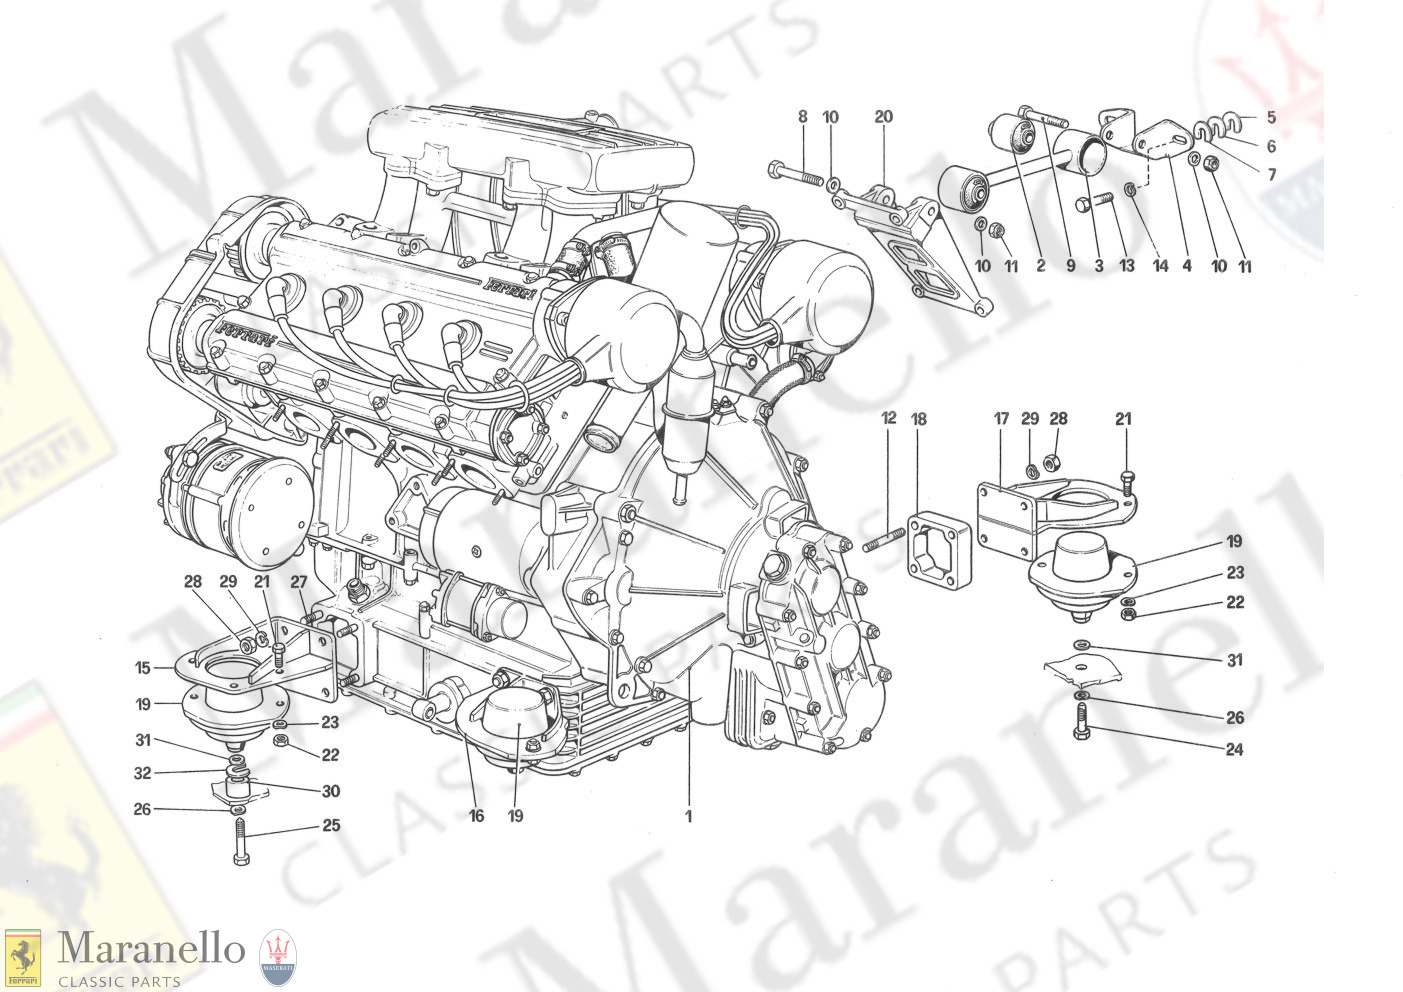 001 - Engine - Gearbox And Supports